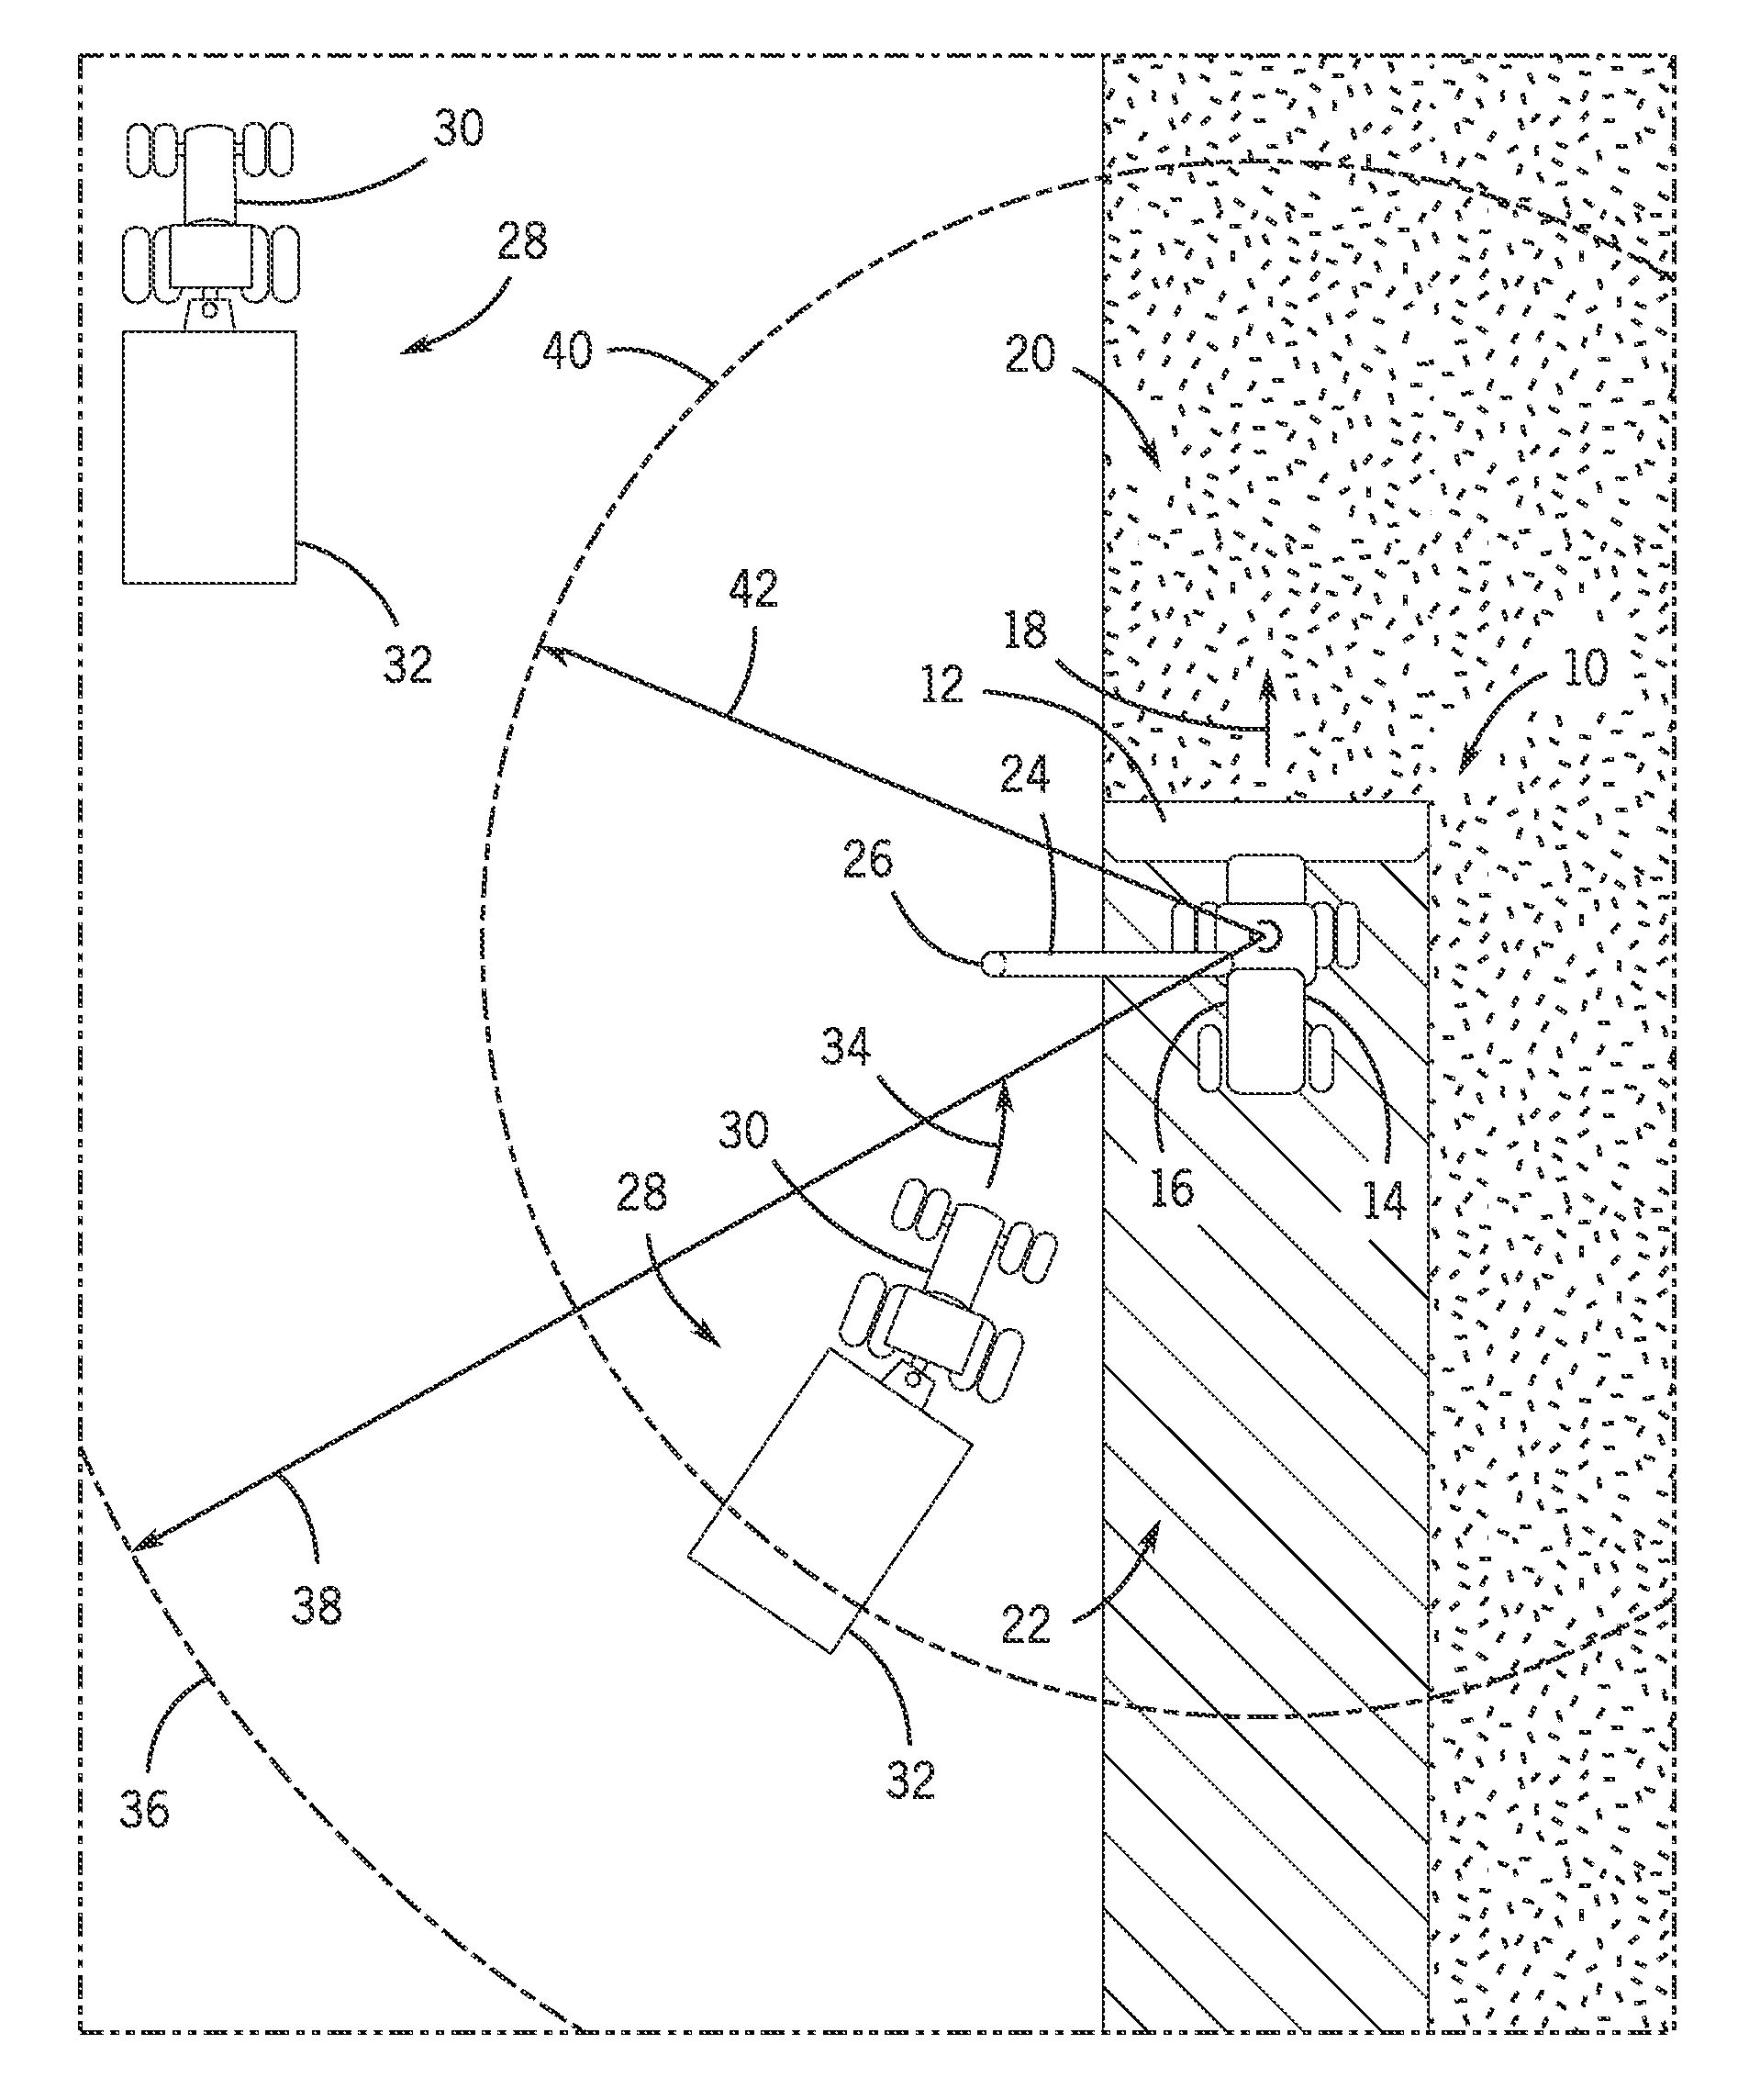 System and method for coordinated control of agricultural vehicles